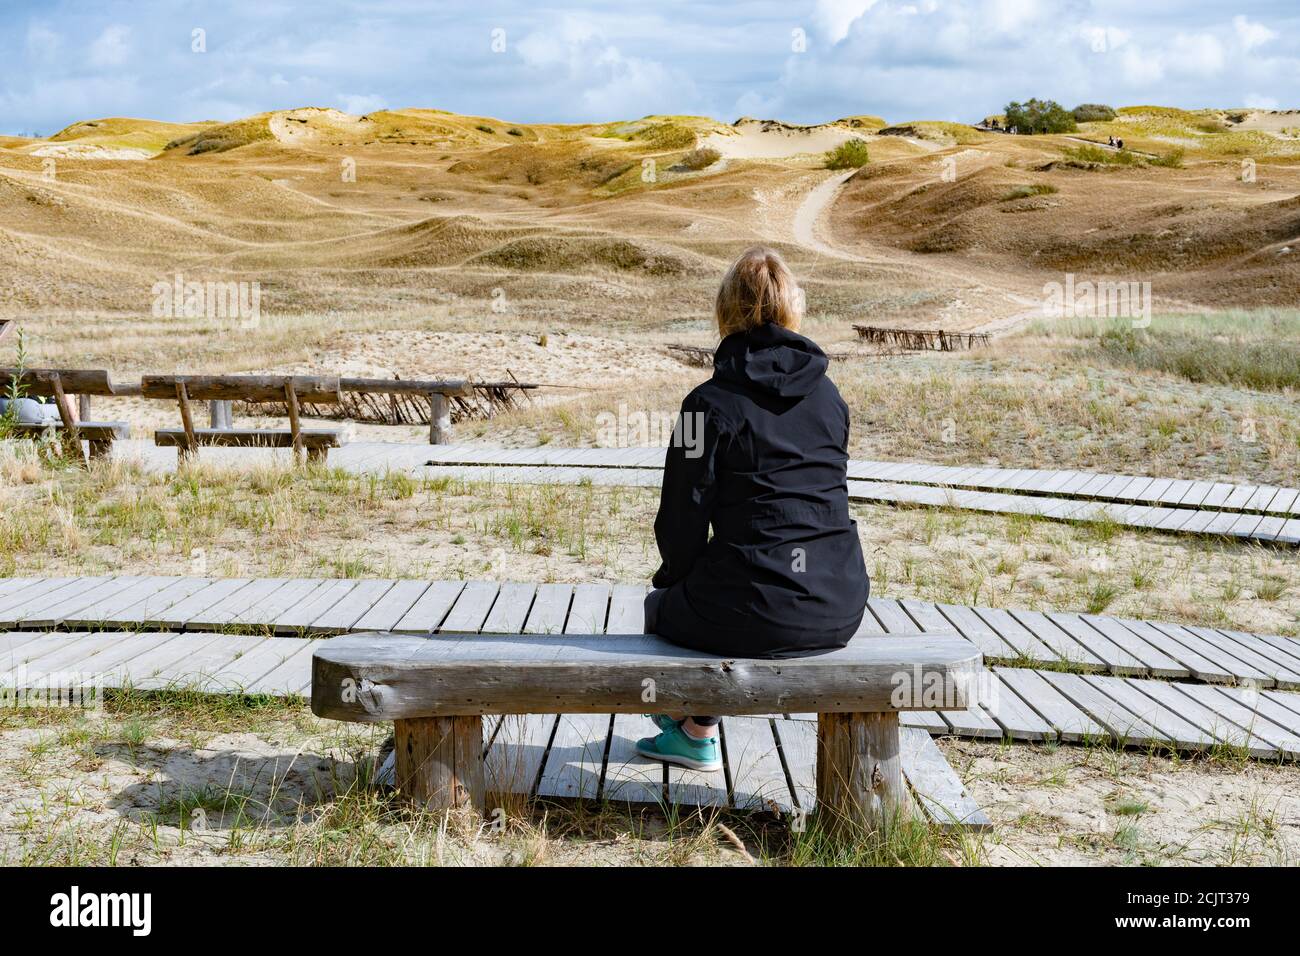 Blonde hair female on the wooden bench looking at Nagliai Nature Reserve in Neringa, Lithuania. Dead dunes, sand hills built by strong winds, with rav Stock Photo